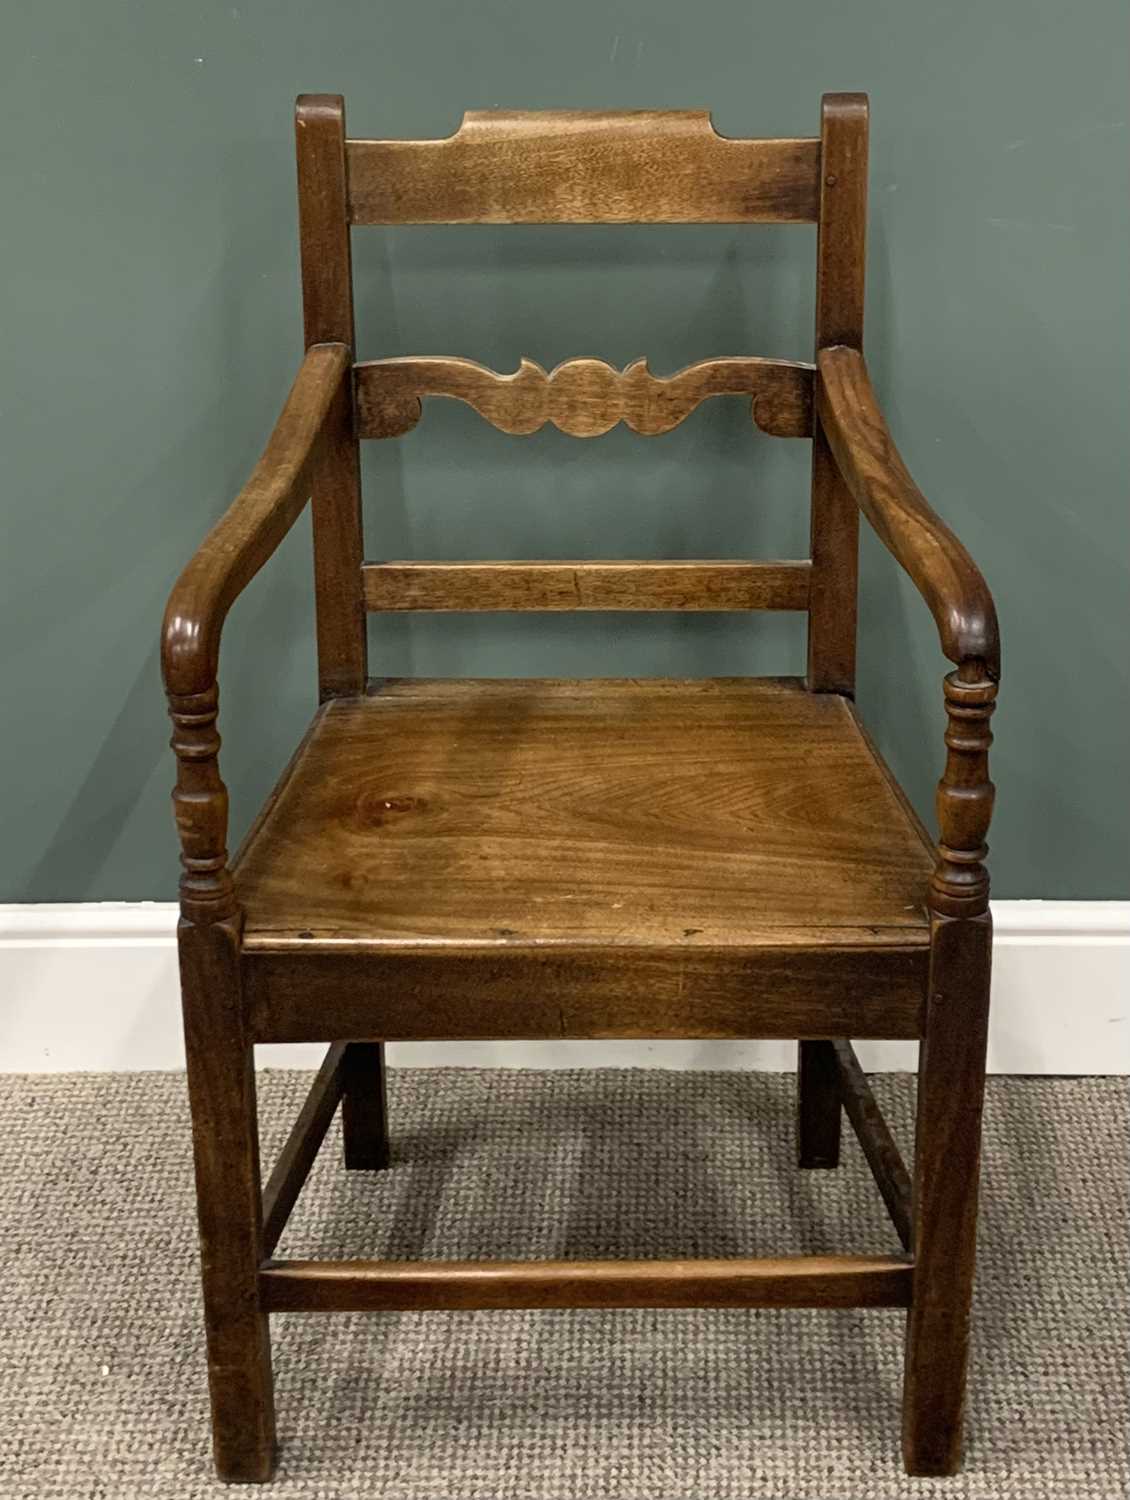 PEG JOINED MAHOGANY ANTIQUE FARMHOUSE ARMCHAIR, circa 1820, with a shaped central back rail and - Image 2 of 3